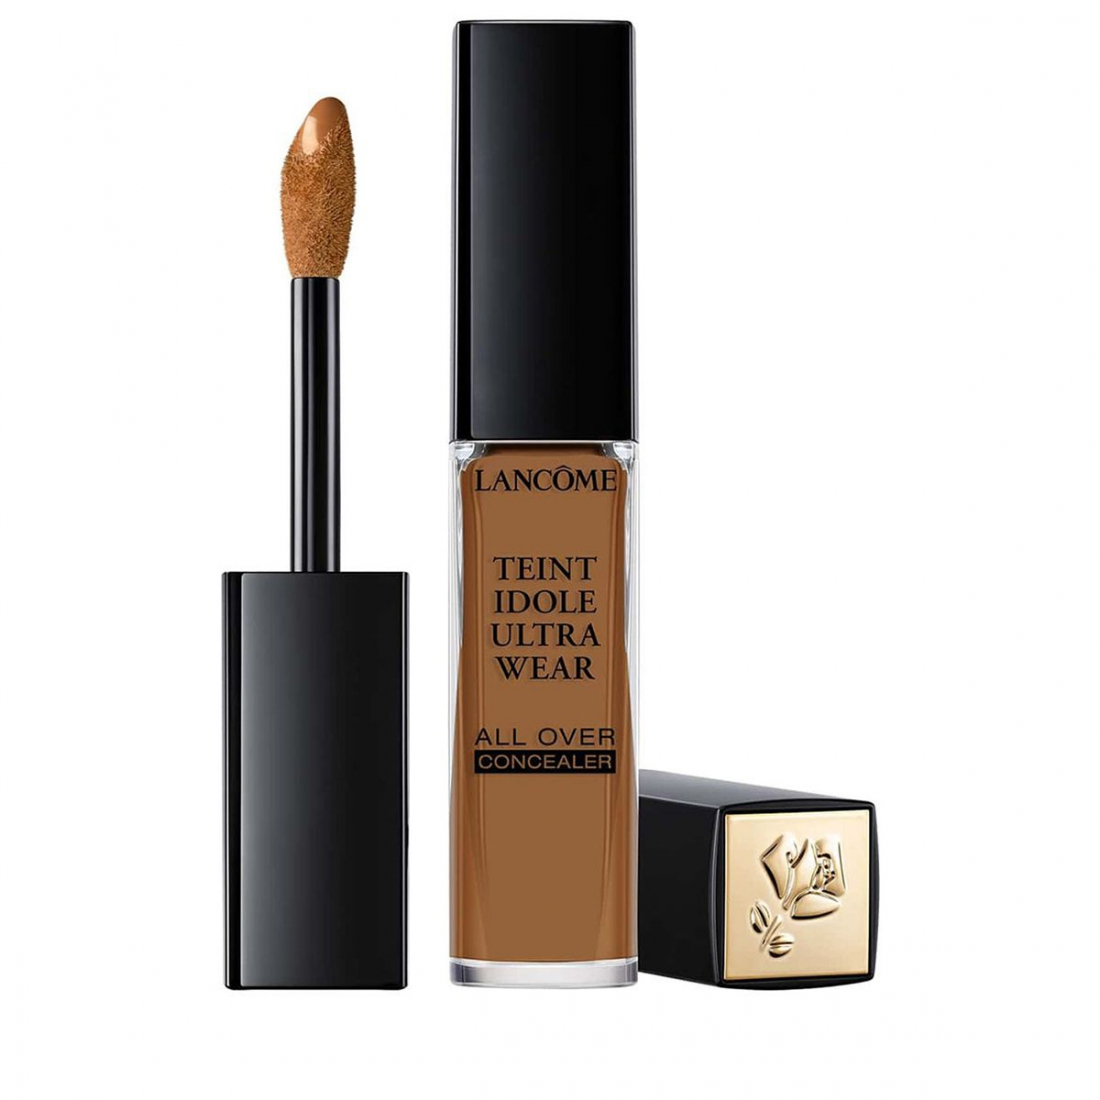 'Teint Idôle Ultra Wear All Over' Concealer - 011 Muscade 13.5 ml